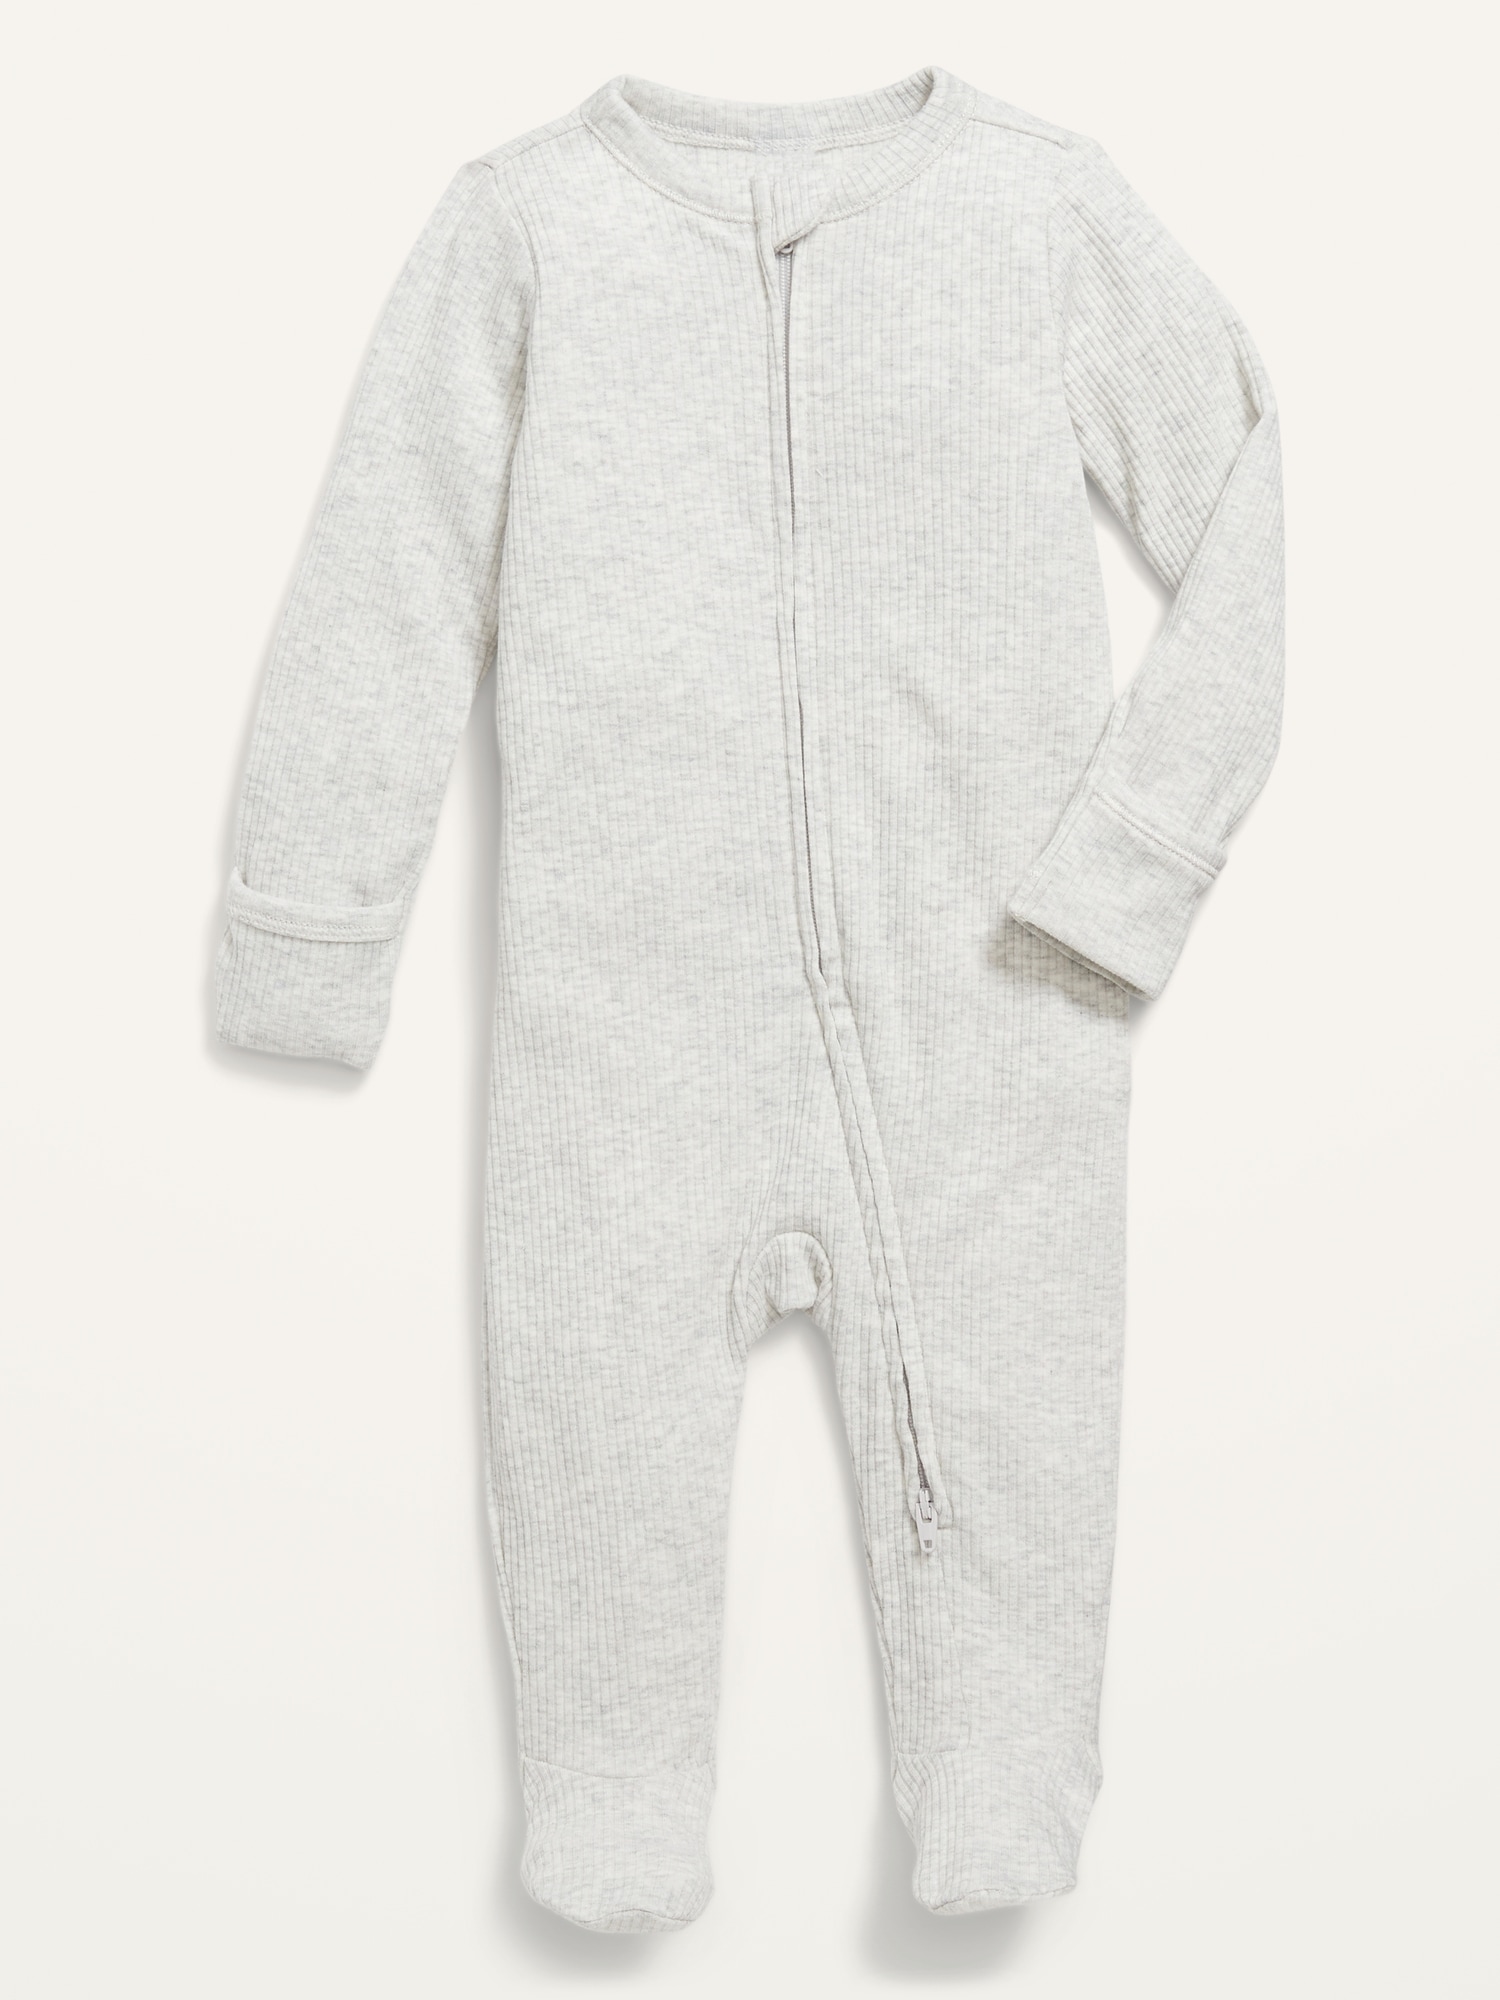 Unisex Sleep & Play Rib-Knit Footed One-Piece for Baby